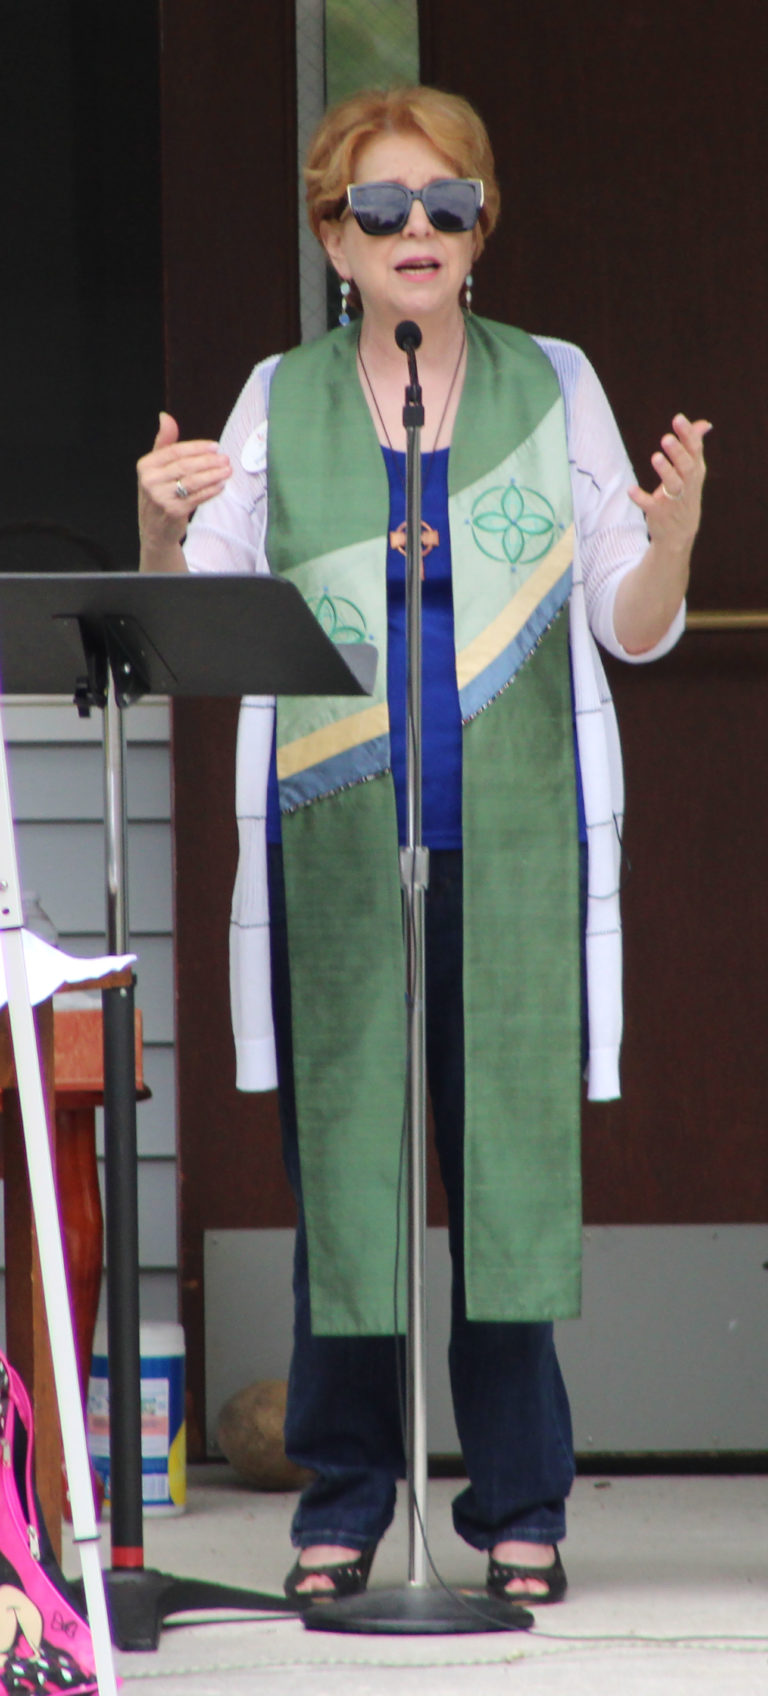 Washougal United Methodist Church pastor Vivian Hiestand delivers a sermon during a service on Sunday, July 5.